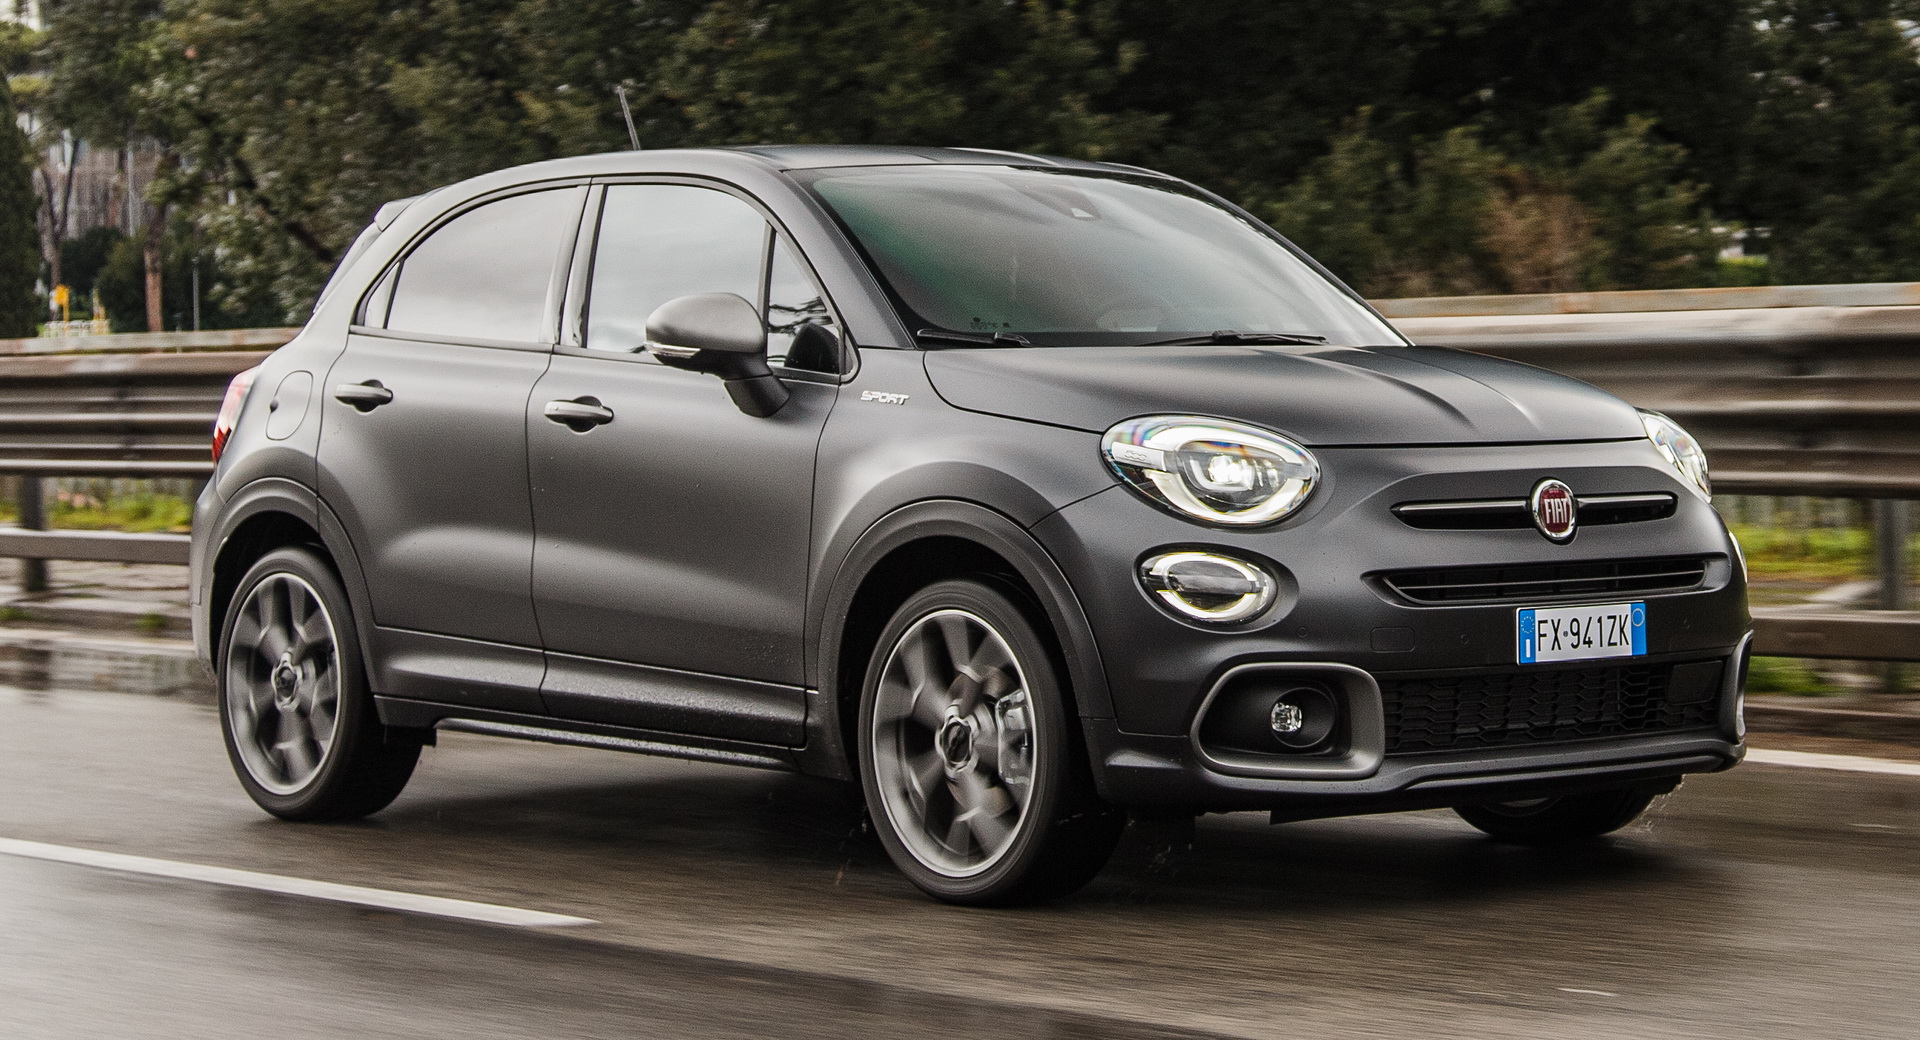 Fiat Updates 500 Model Family In Europe With New Trims, Colors | Carscoops